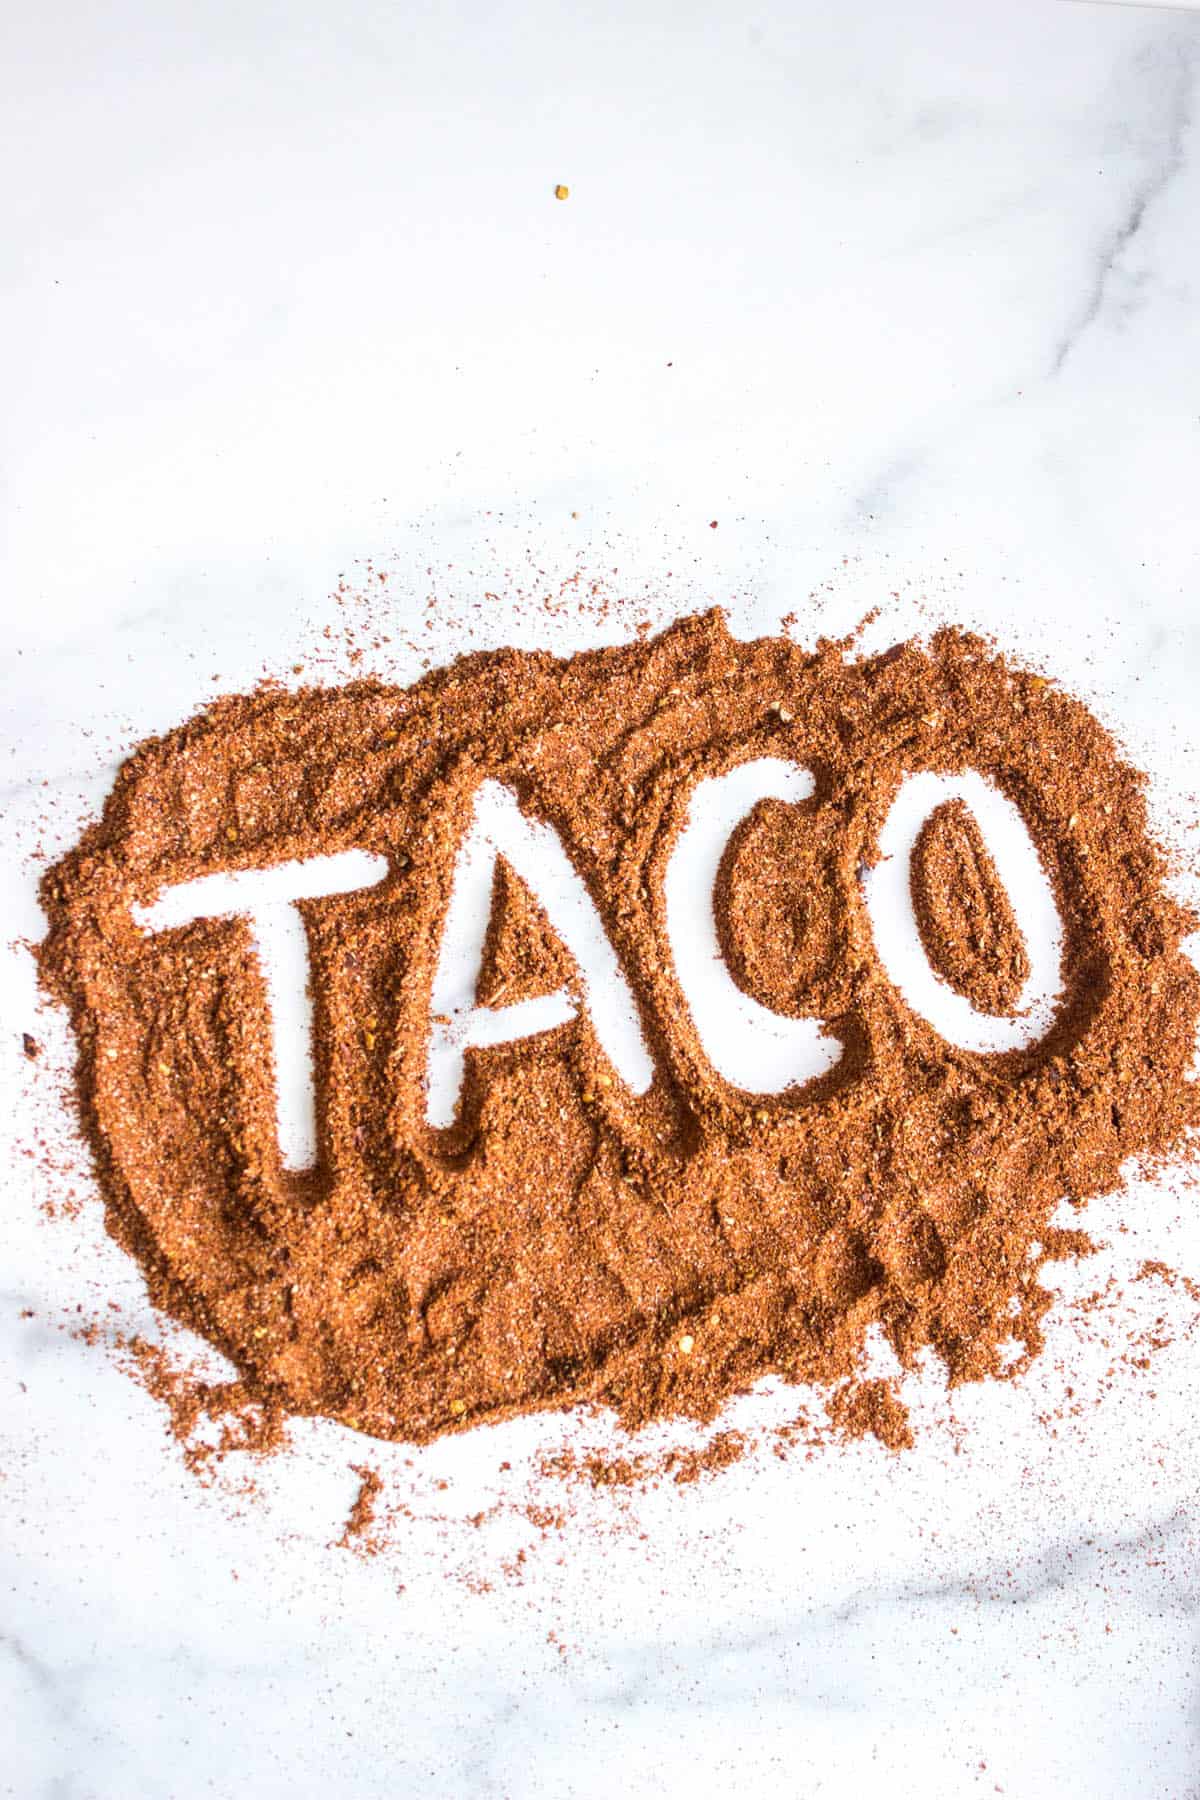 Homemade Taco Seasoning spread out with the word taco written in it